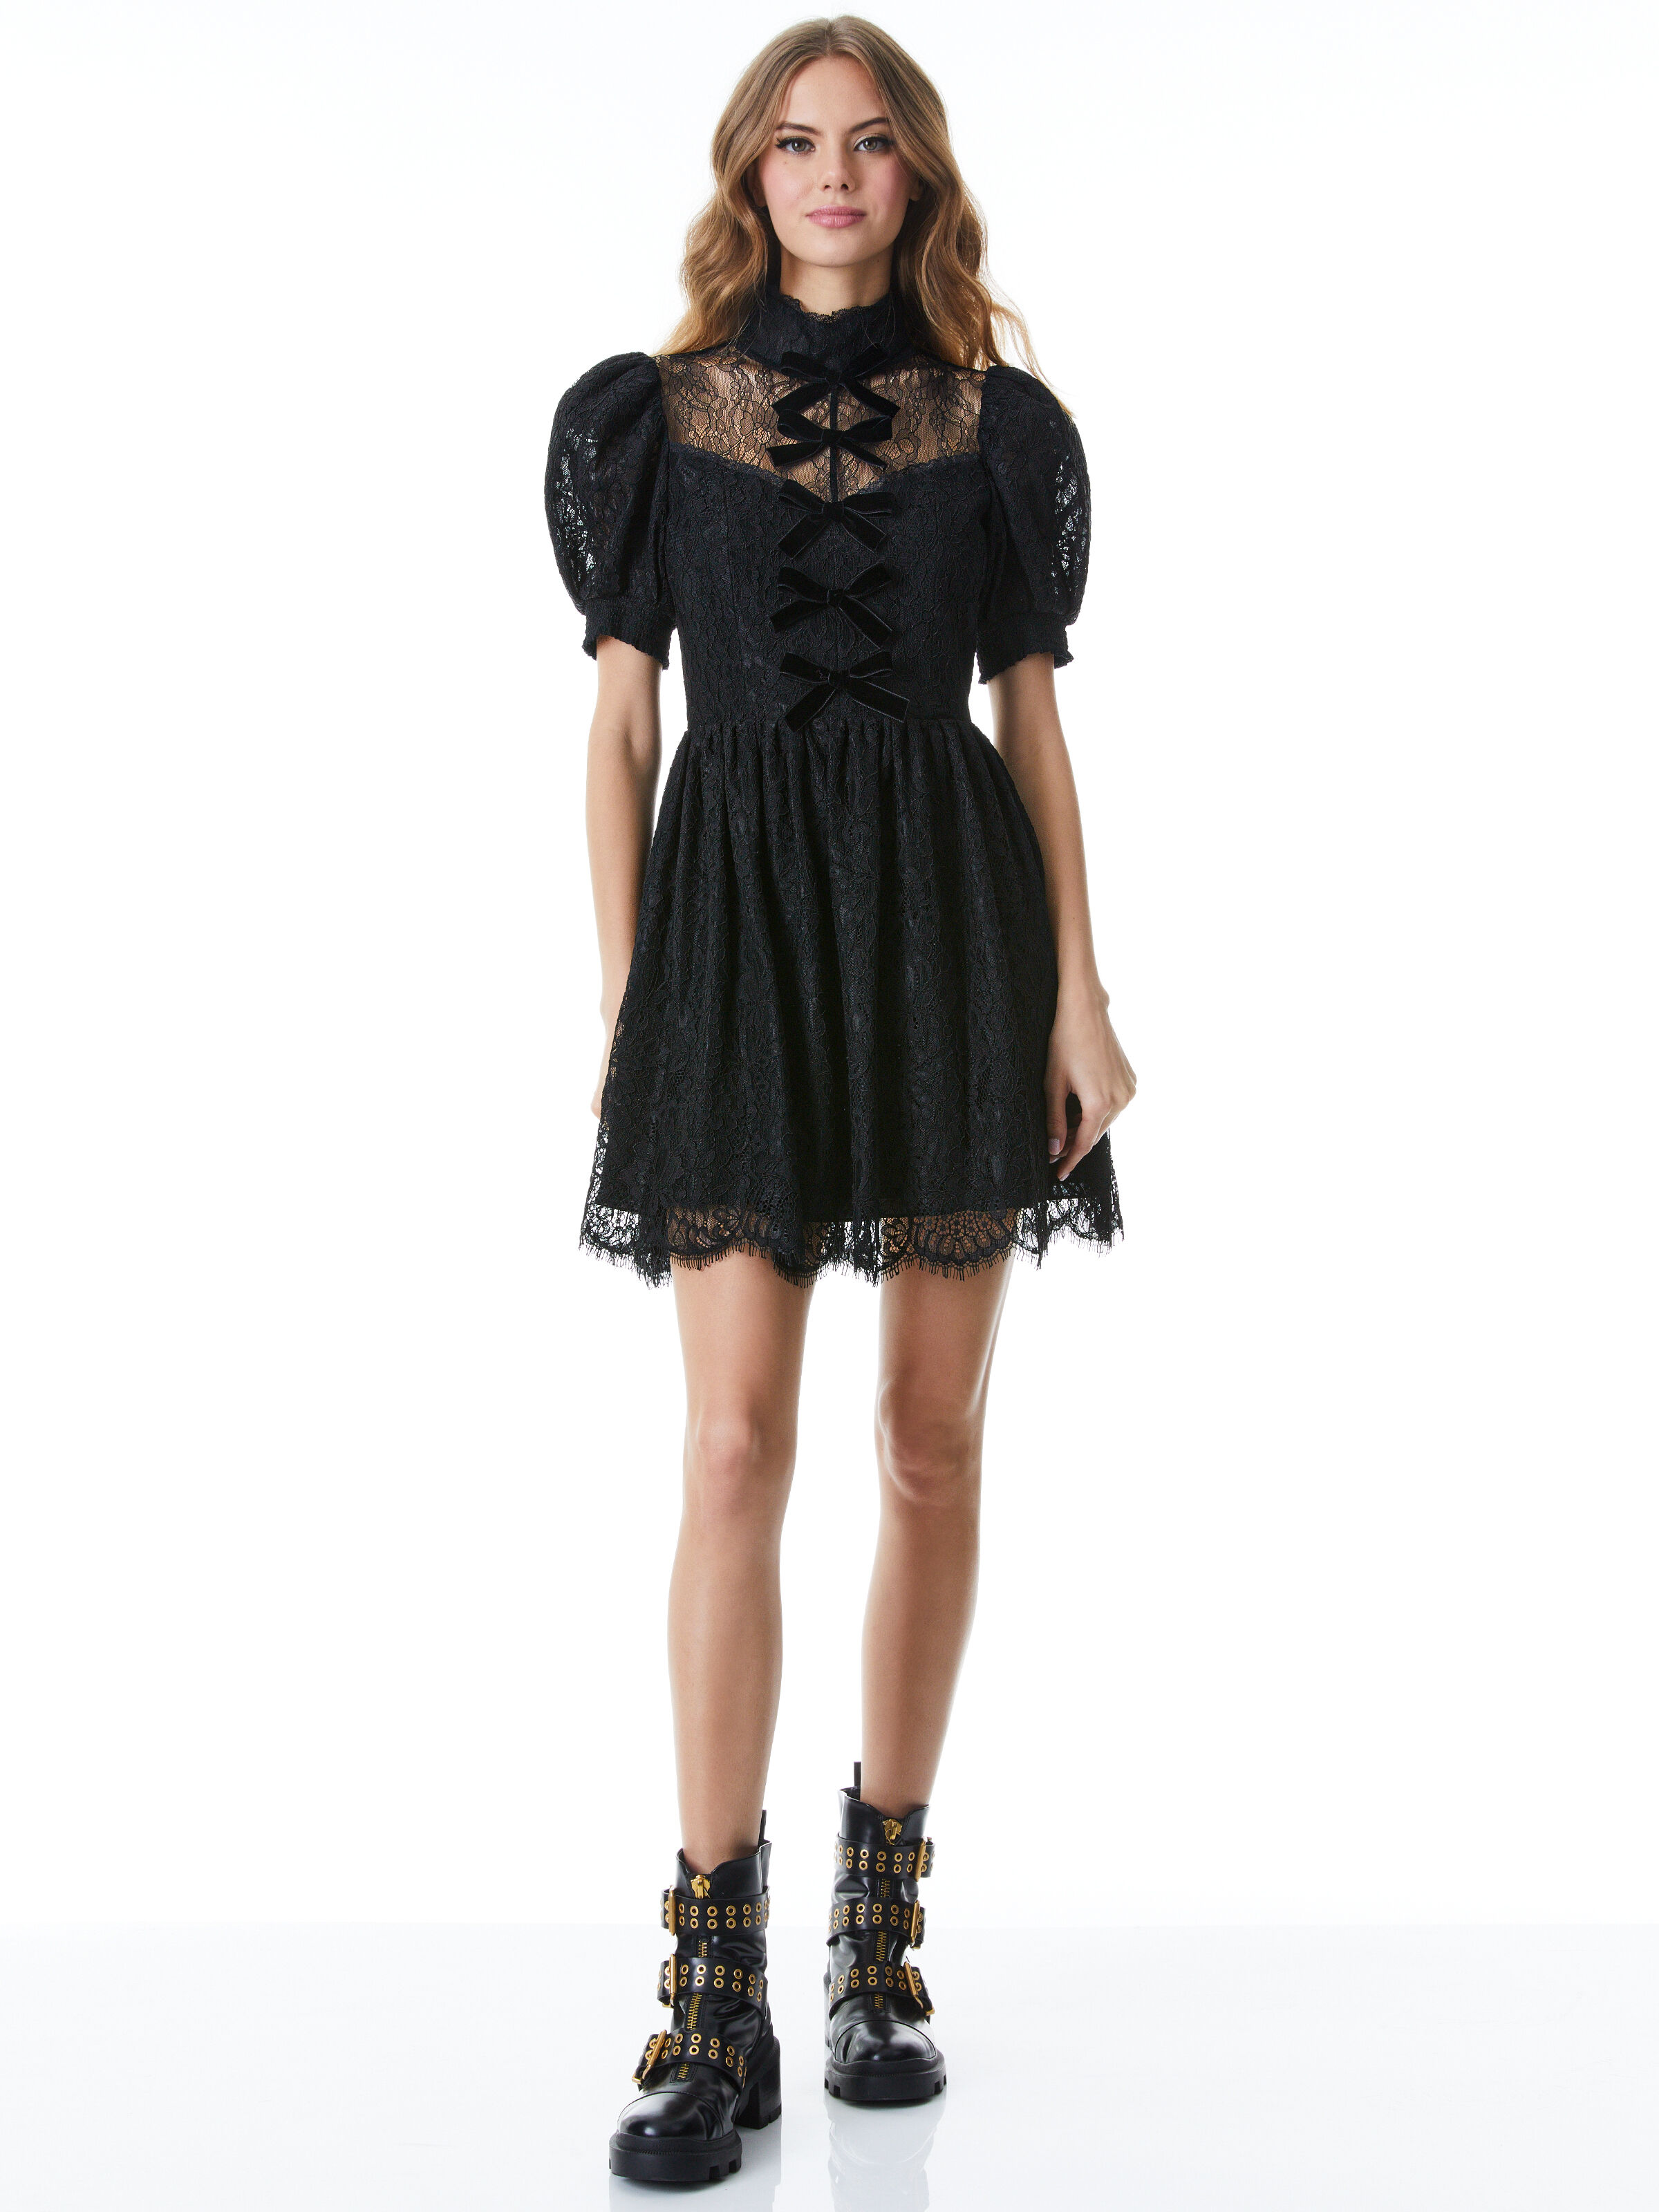 All Dresses | Alice And Olivia